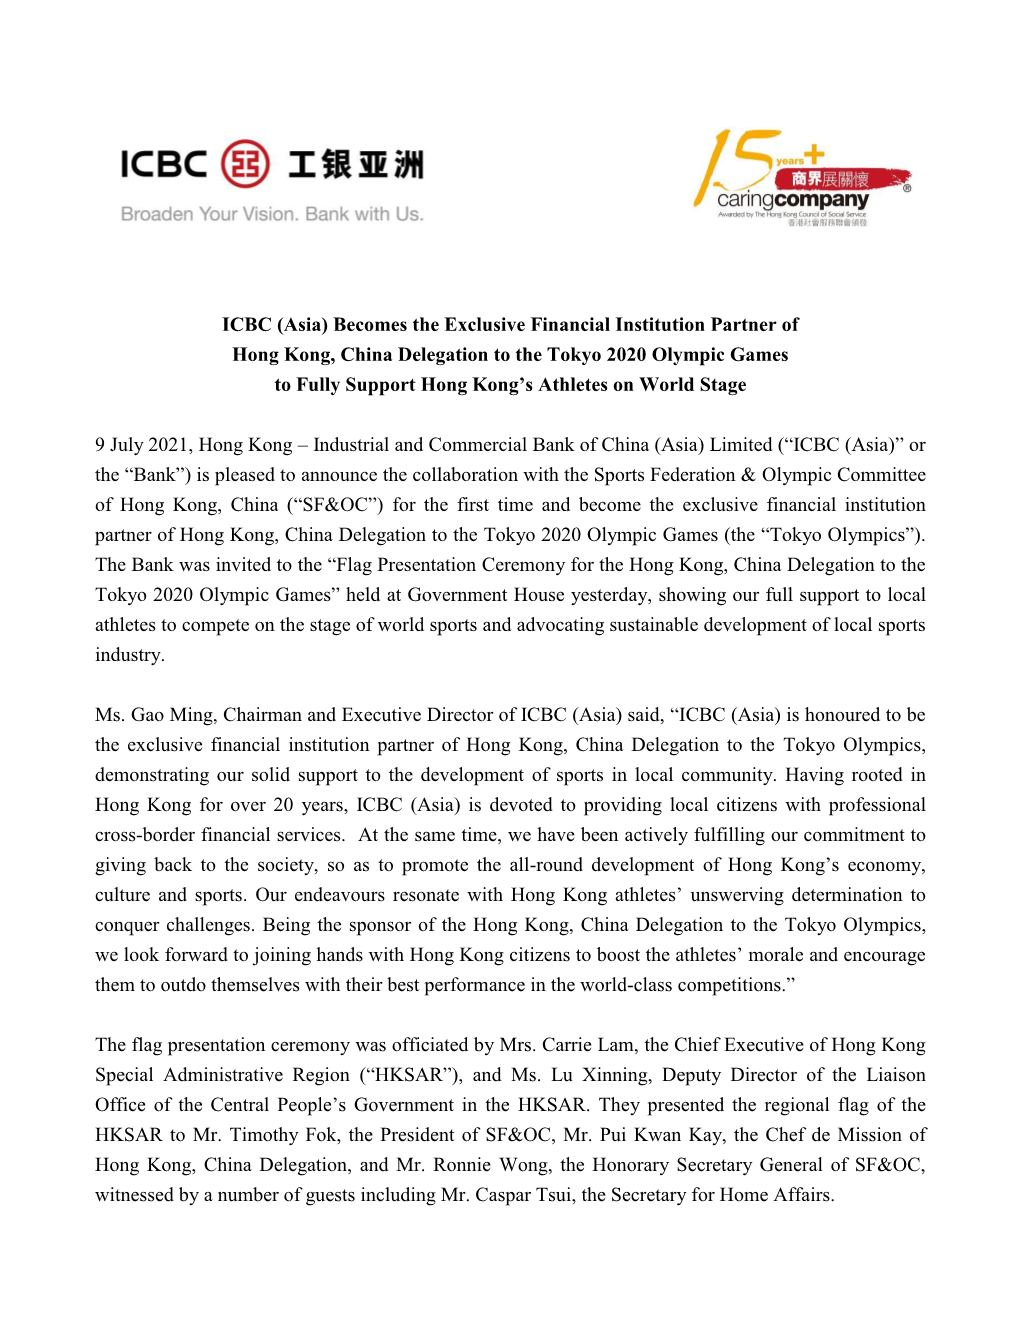 ICBC (Asia) Becomes the Exclusive Financial Institution Partner of Hong